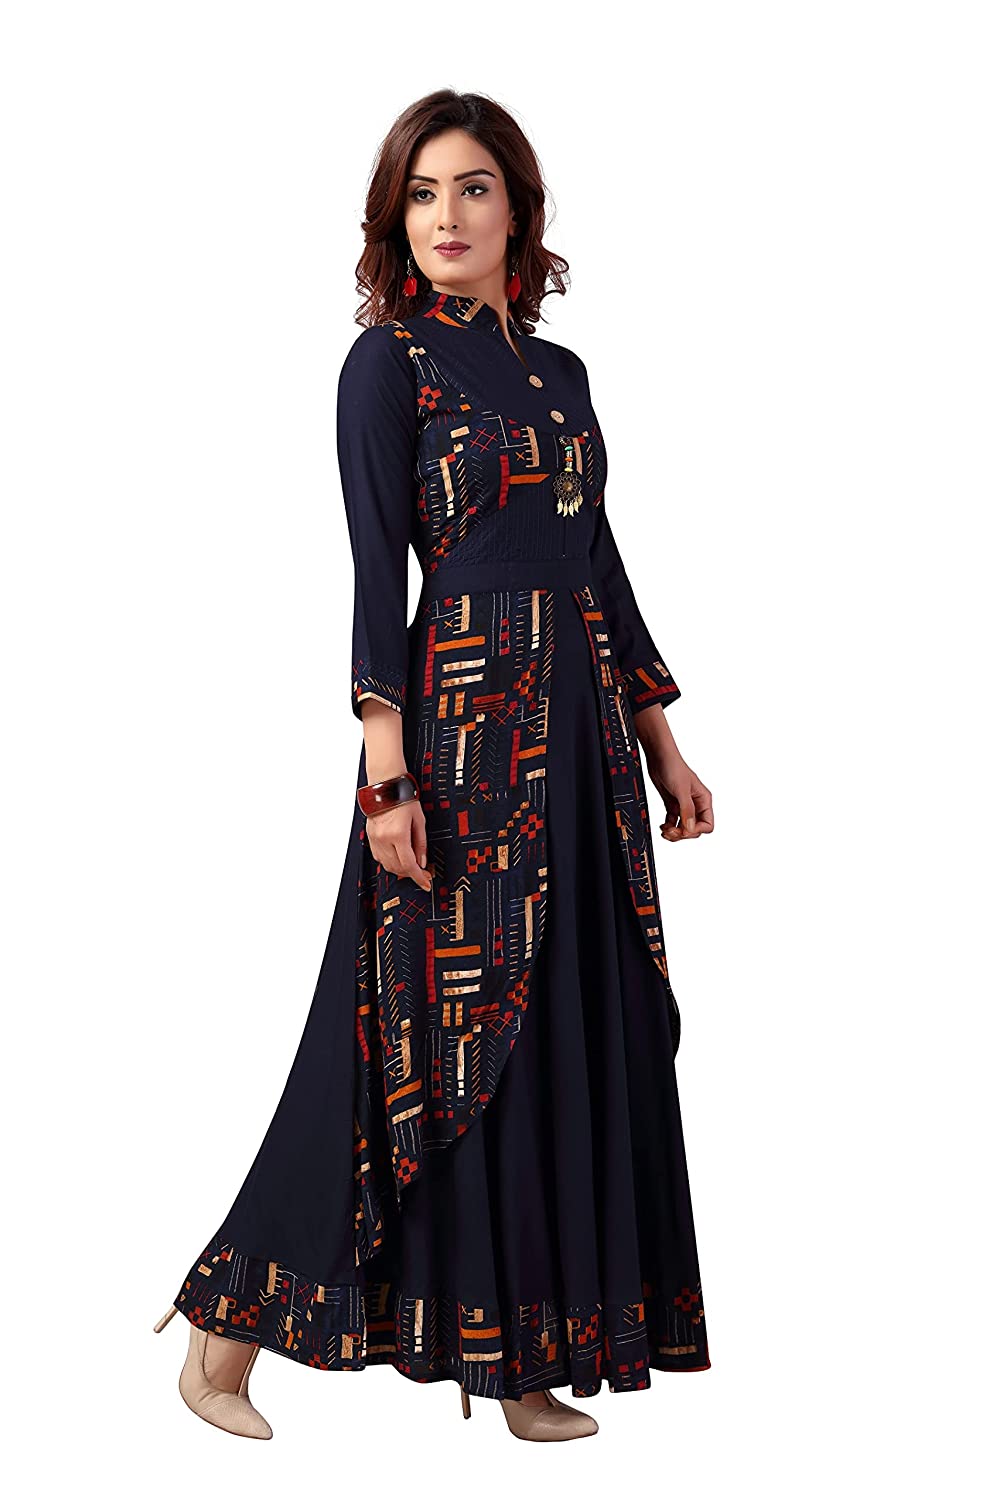 Madhuram textiles Women's A-line and 3/4th Sleeves Fully Stitched Plain Printed Kurta with Ankle Length and Mandarin Neck Collar and Long Kurtis for Women -  Kurtas & Kurtis in Sri Lanka from Arcade Online Shopping - Just Rs. 7199!